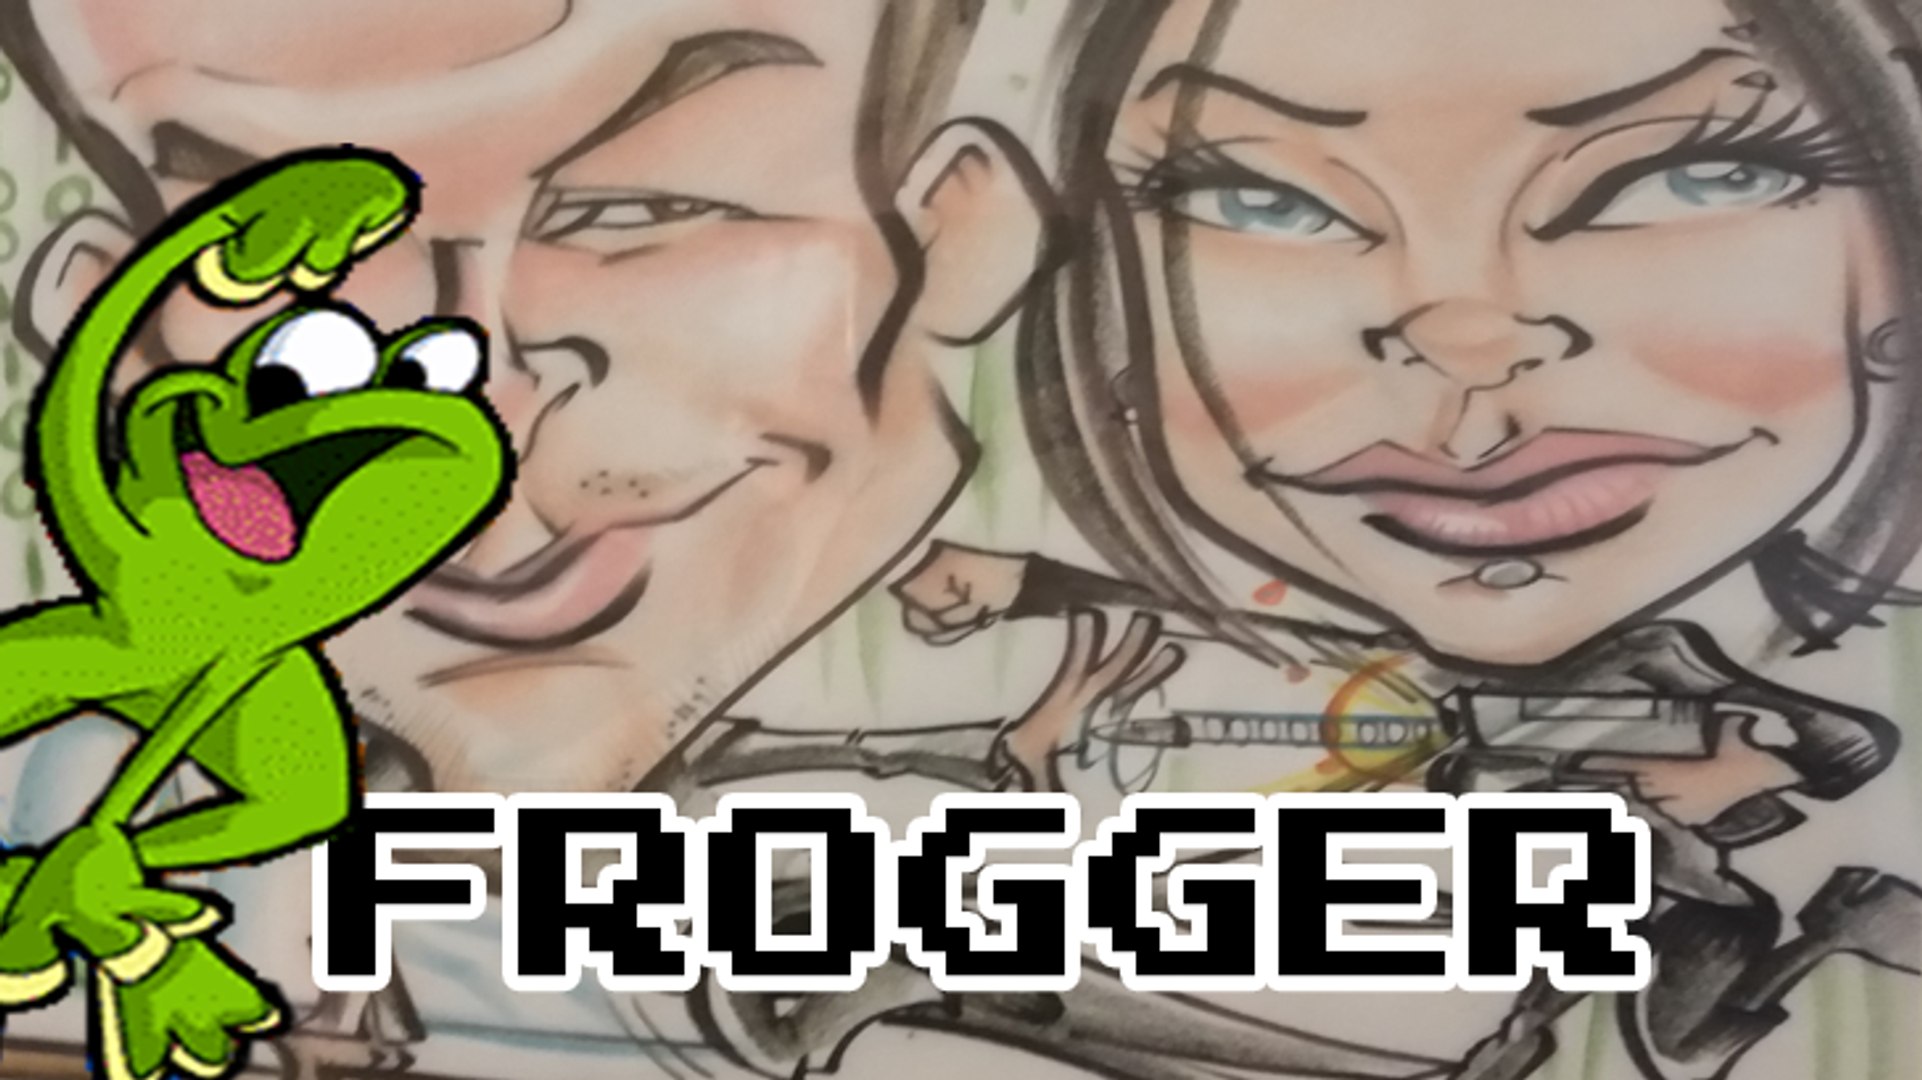 Frogger - Play Together Stay Together E3